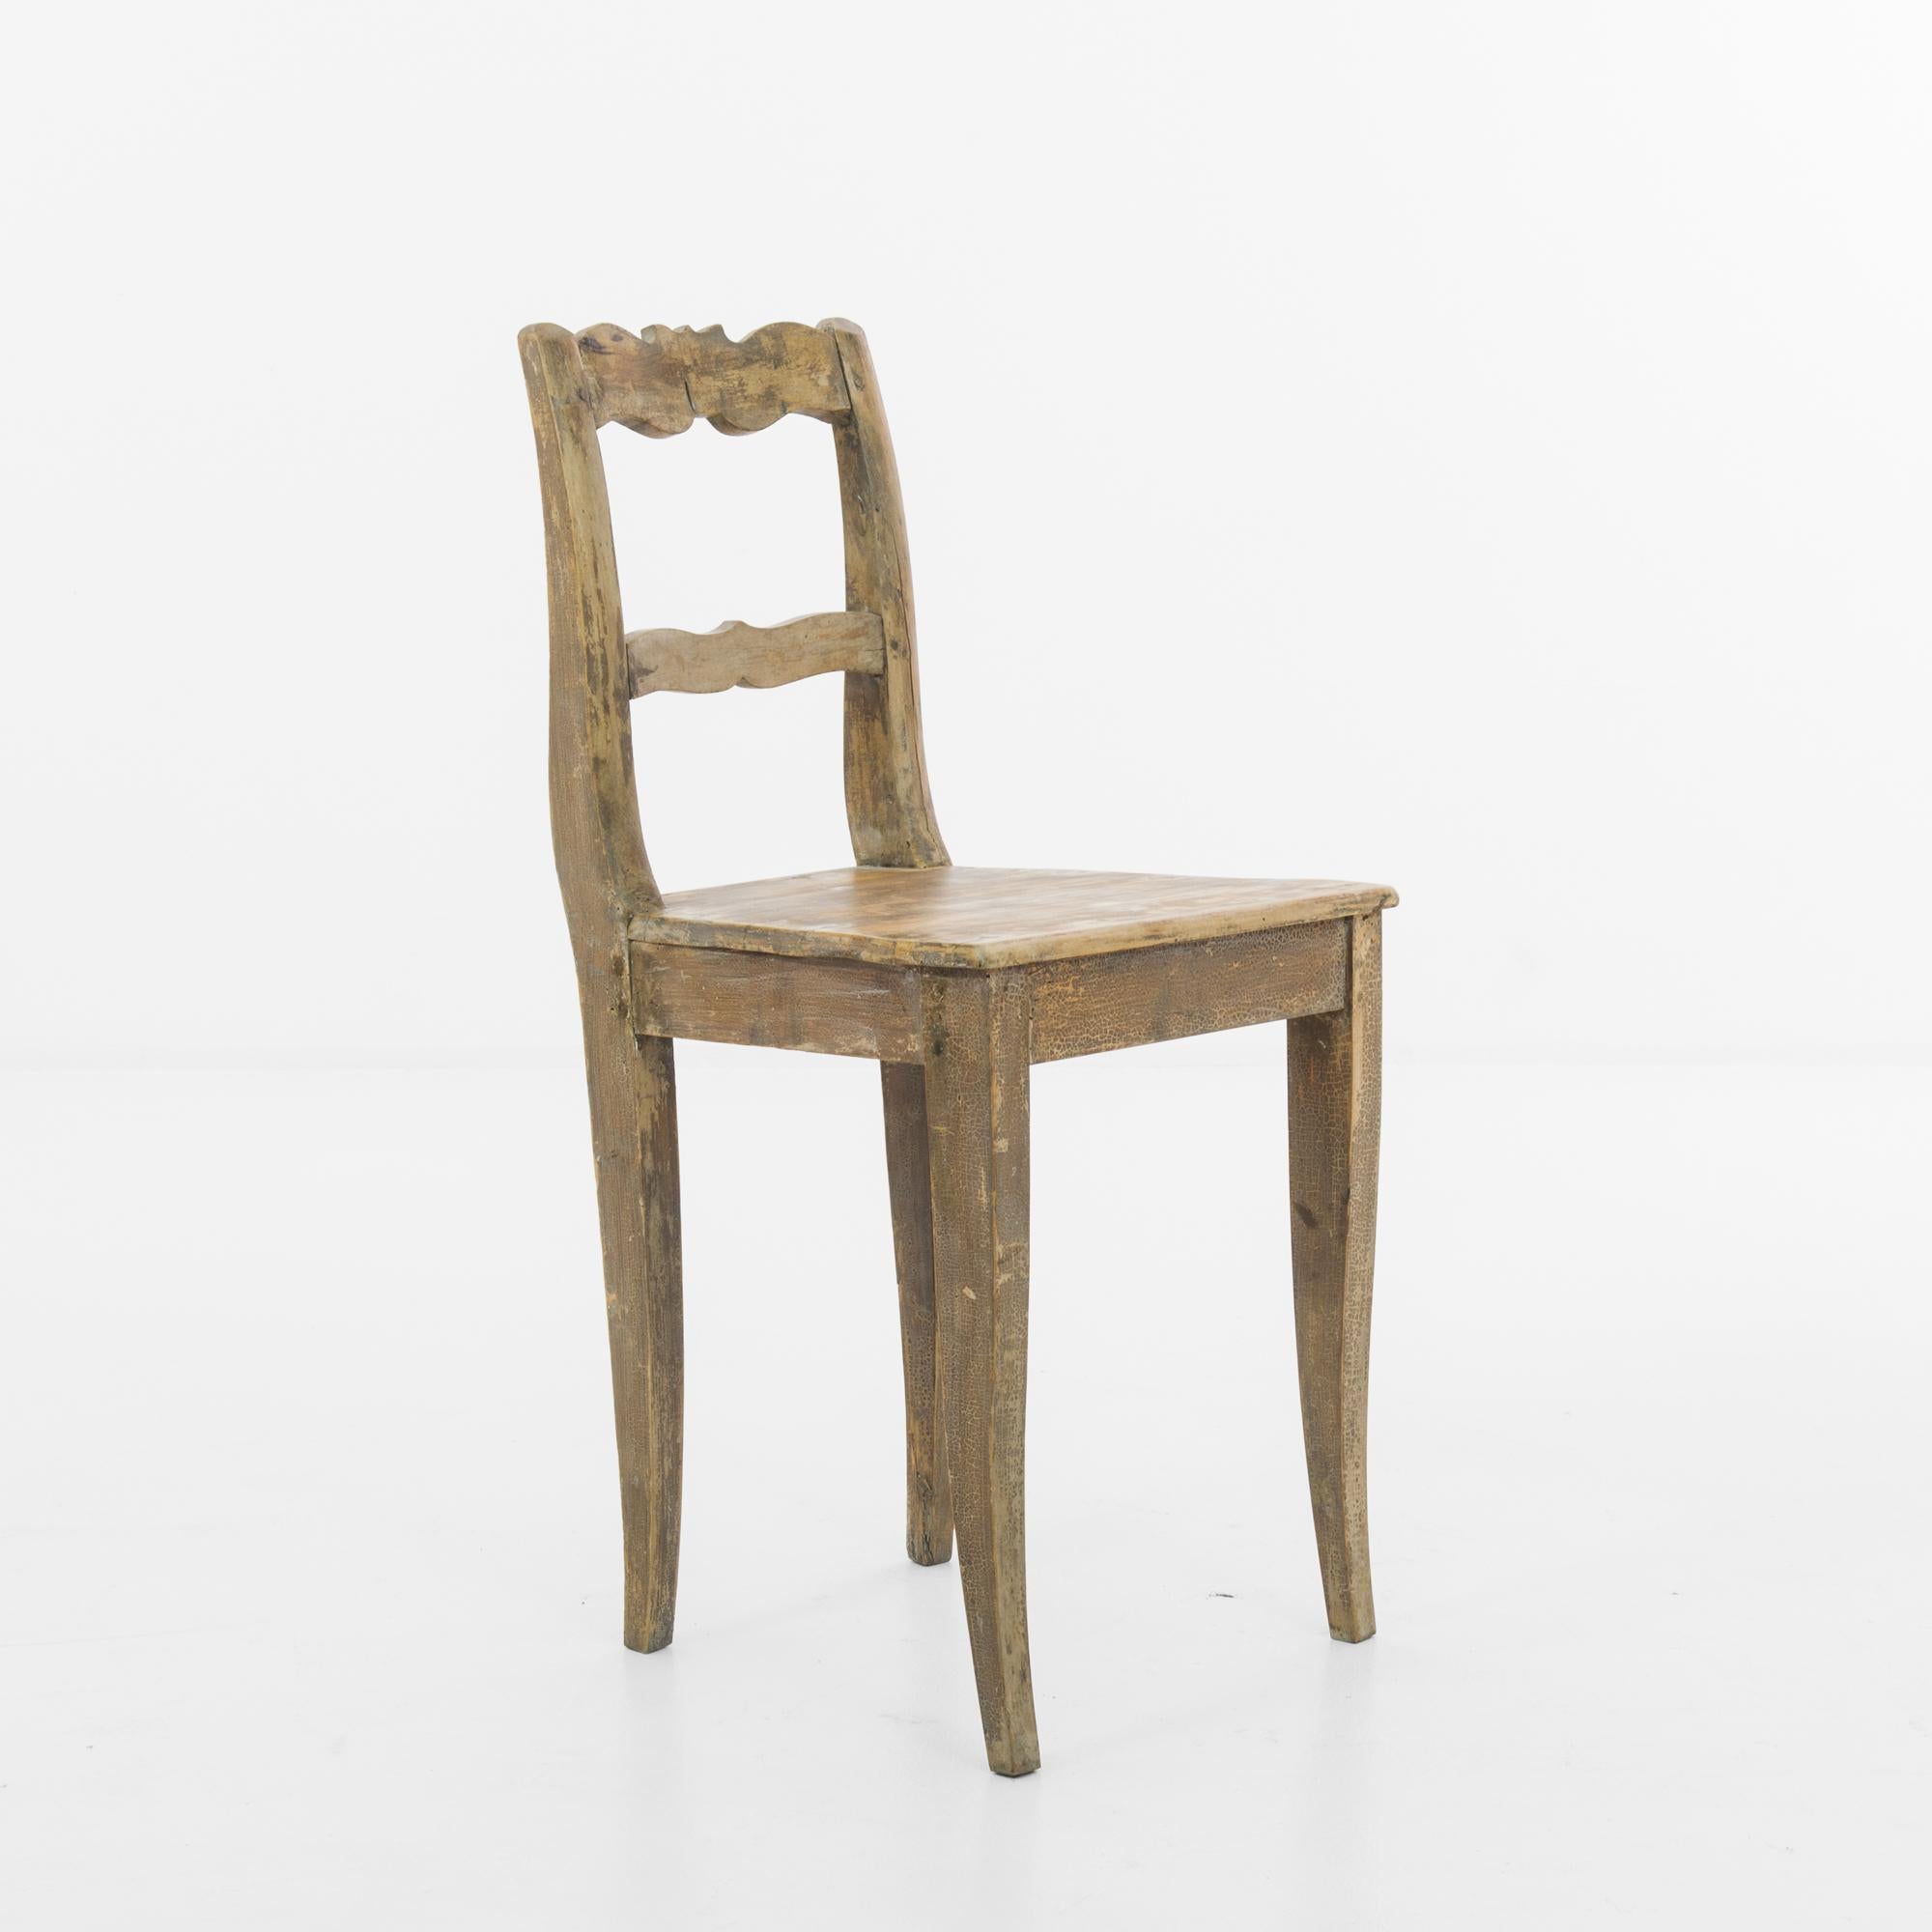 Crafted in the early 1900s, this exquisite German wooden chair epitomizes the timeless elegance and superb craftsmanship of the era. Carved from fine, sturdy wood, likely oak or beech, this chair boasts a classic design that seamlessly blends